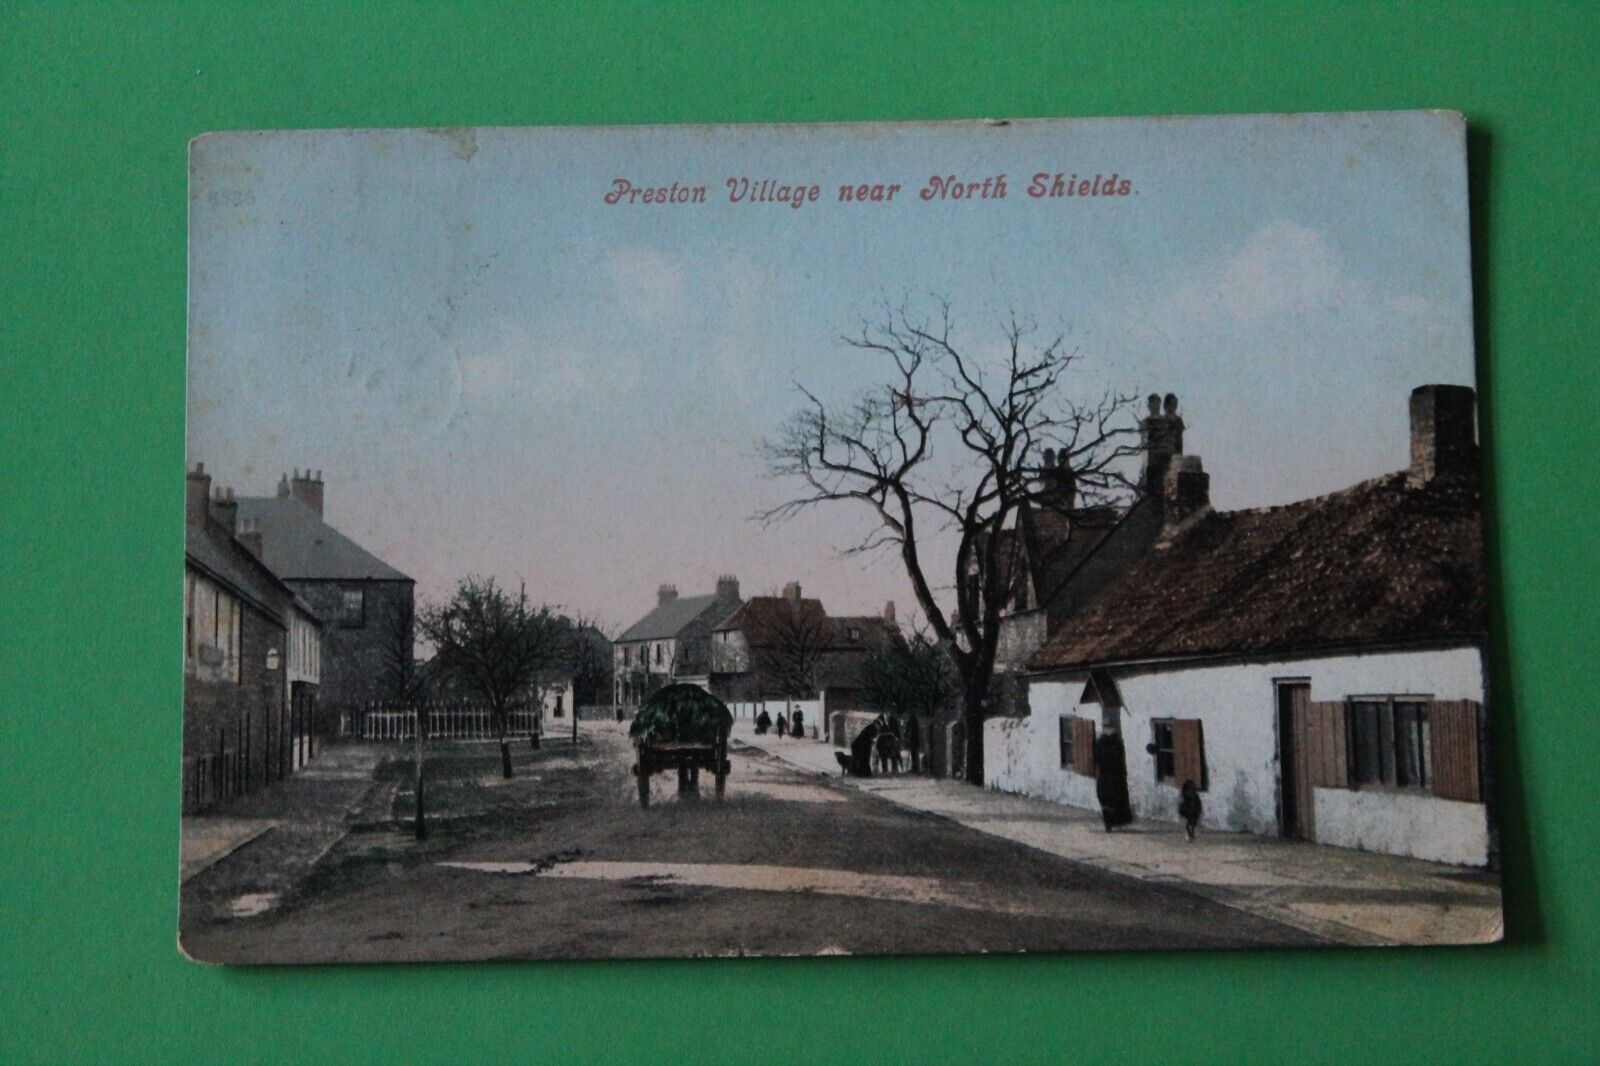 House Clearance - Preston Village near North Shields - posted 1906